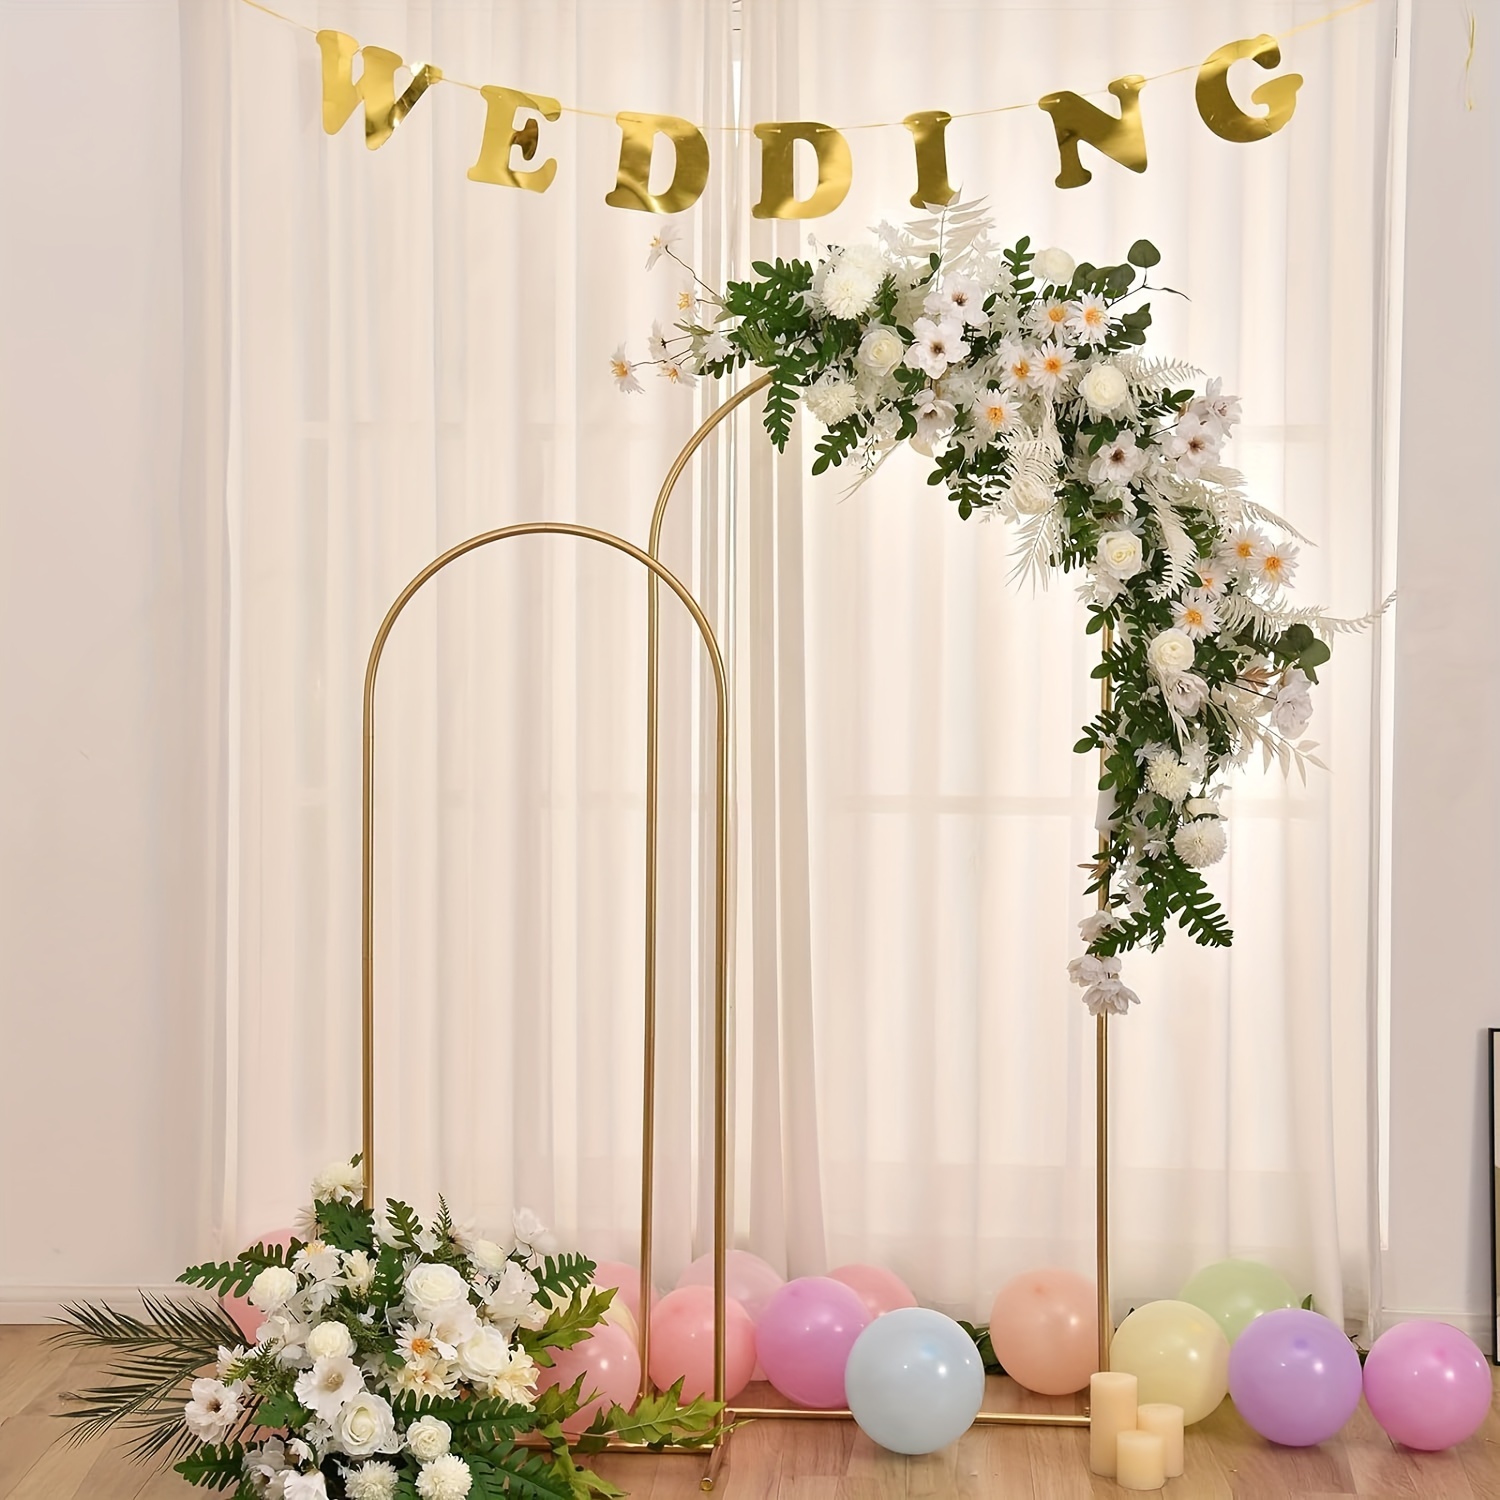 

Set Of 2 Size 5ft&6ft Gold Metal Wedding Arch Stand Metal Wedding Balloon Arch Backdrop Stand For Birthday Party Wedding Ceremony Decoration, Baby Shower Decor